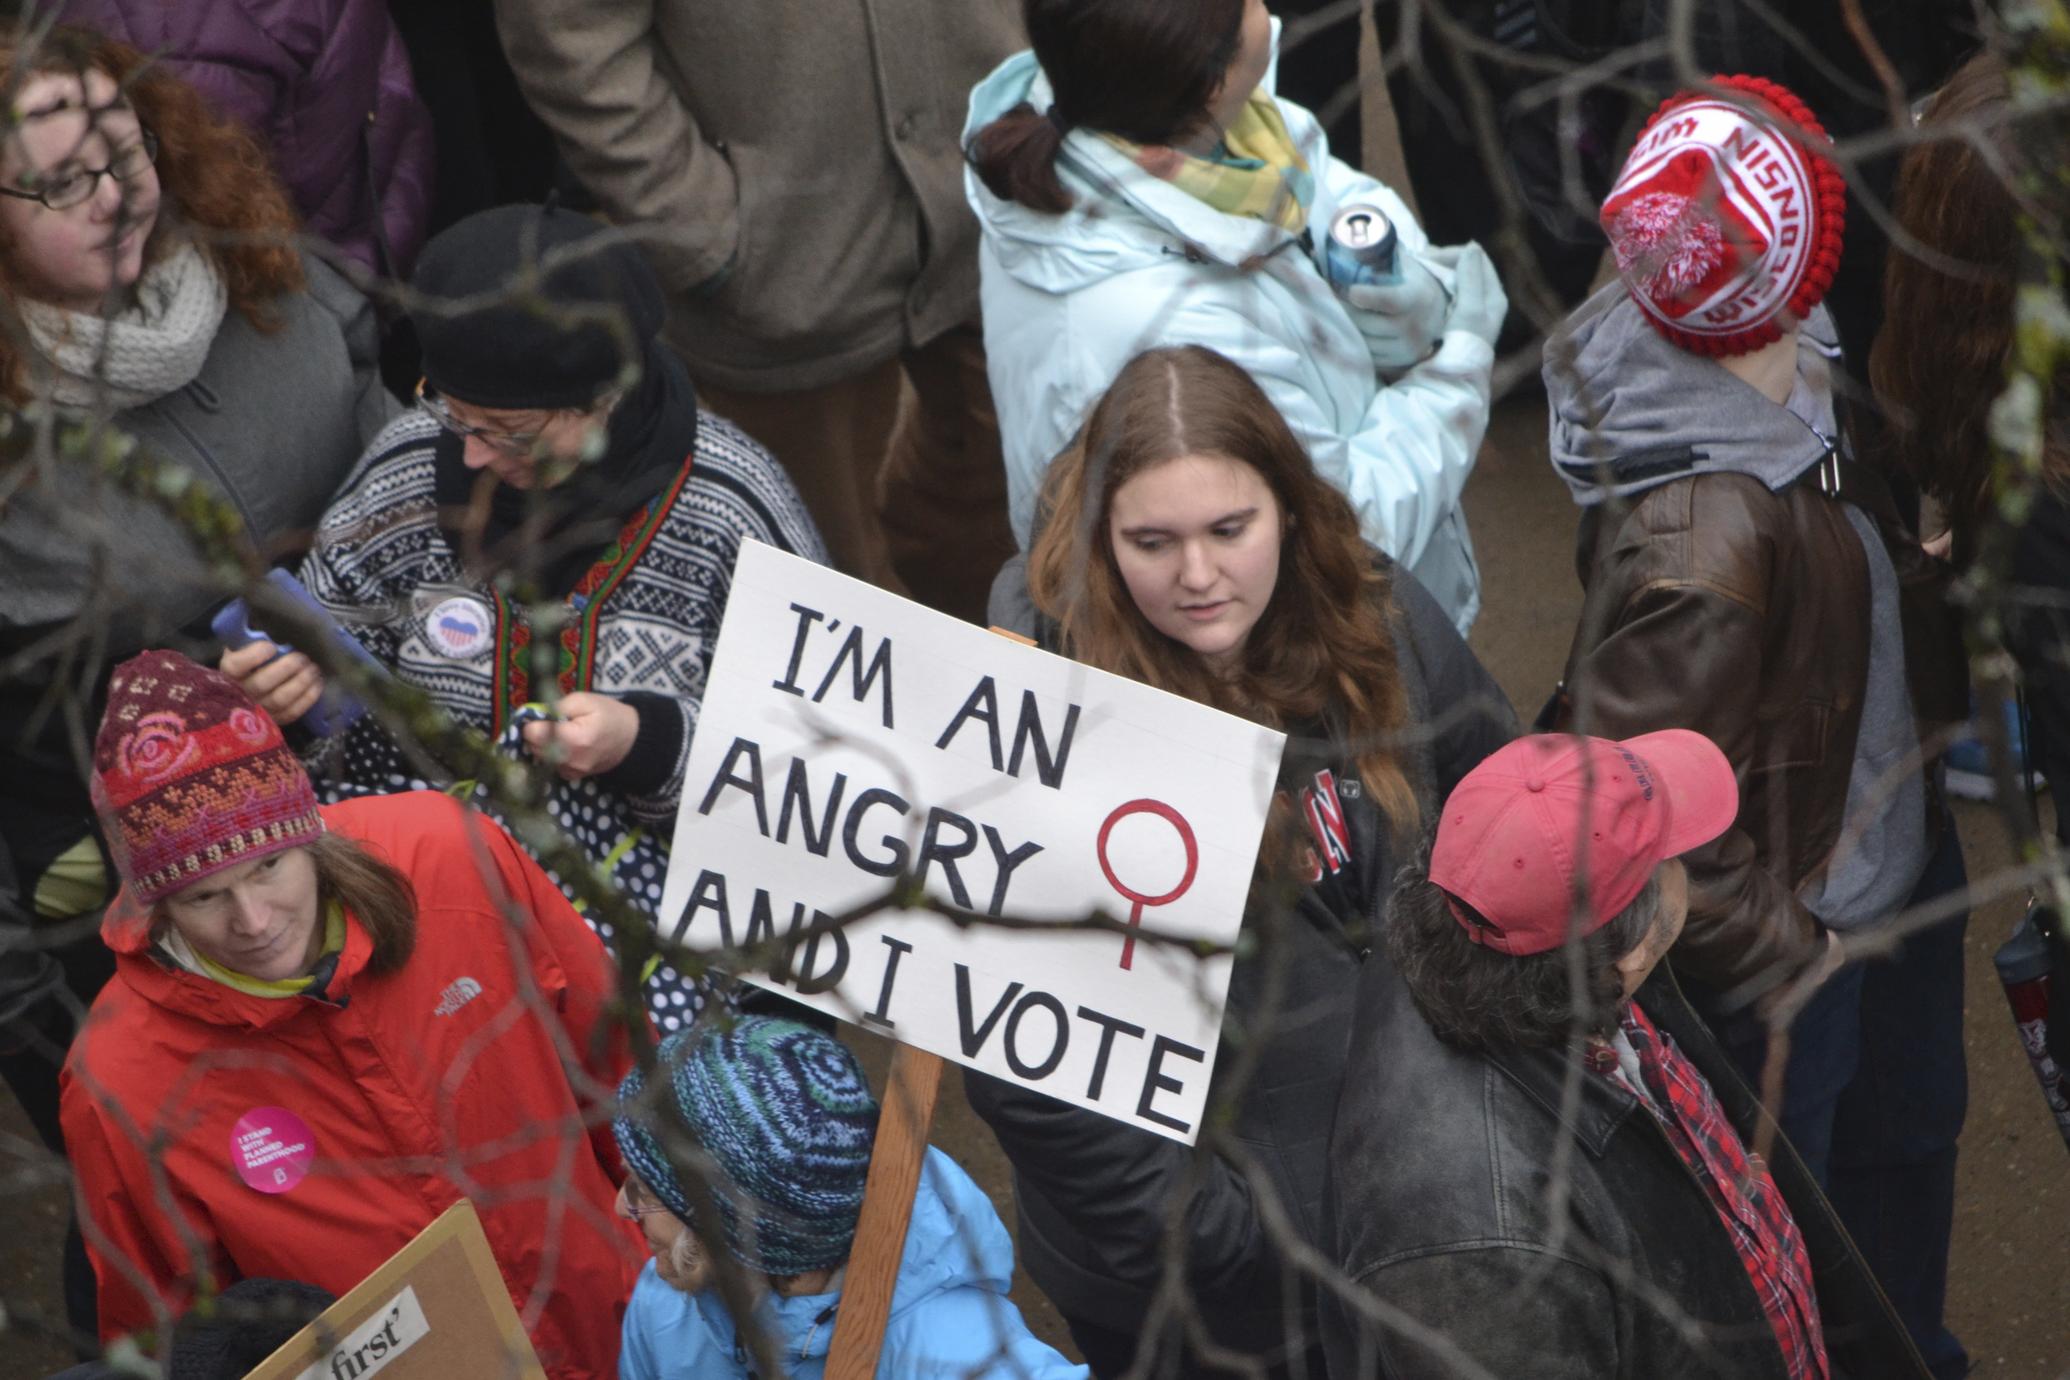 I'm an Angry (Women sign) and I vote